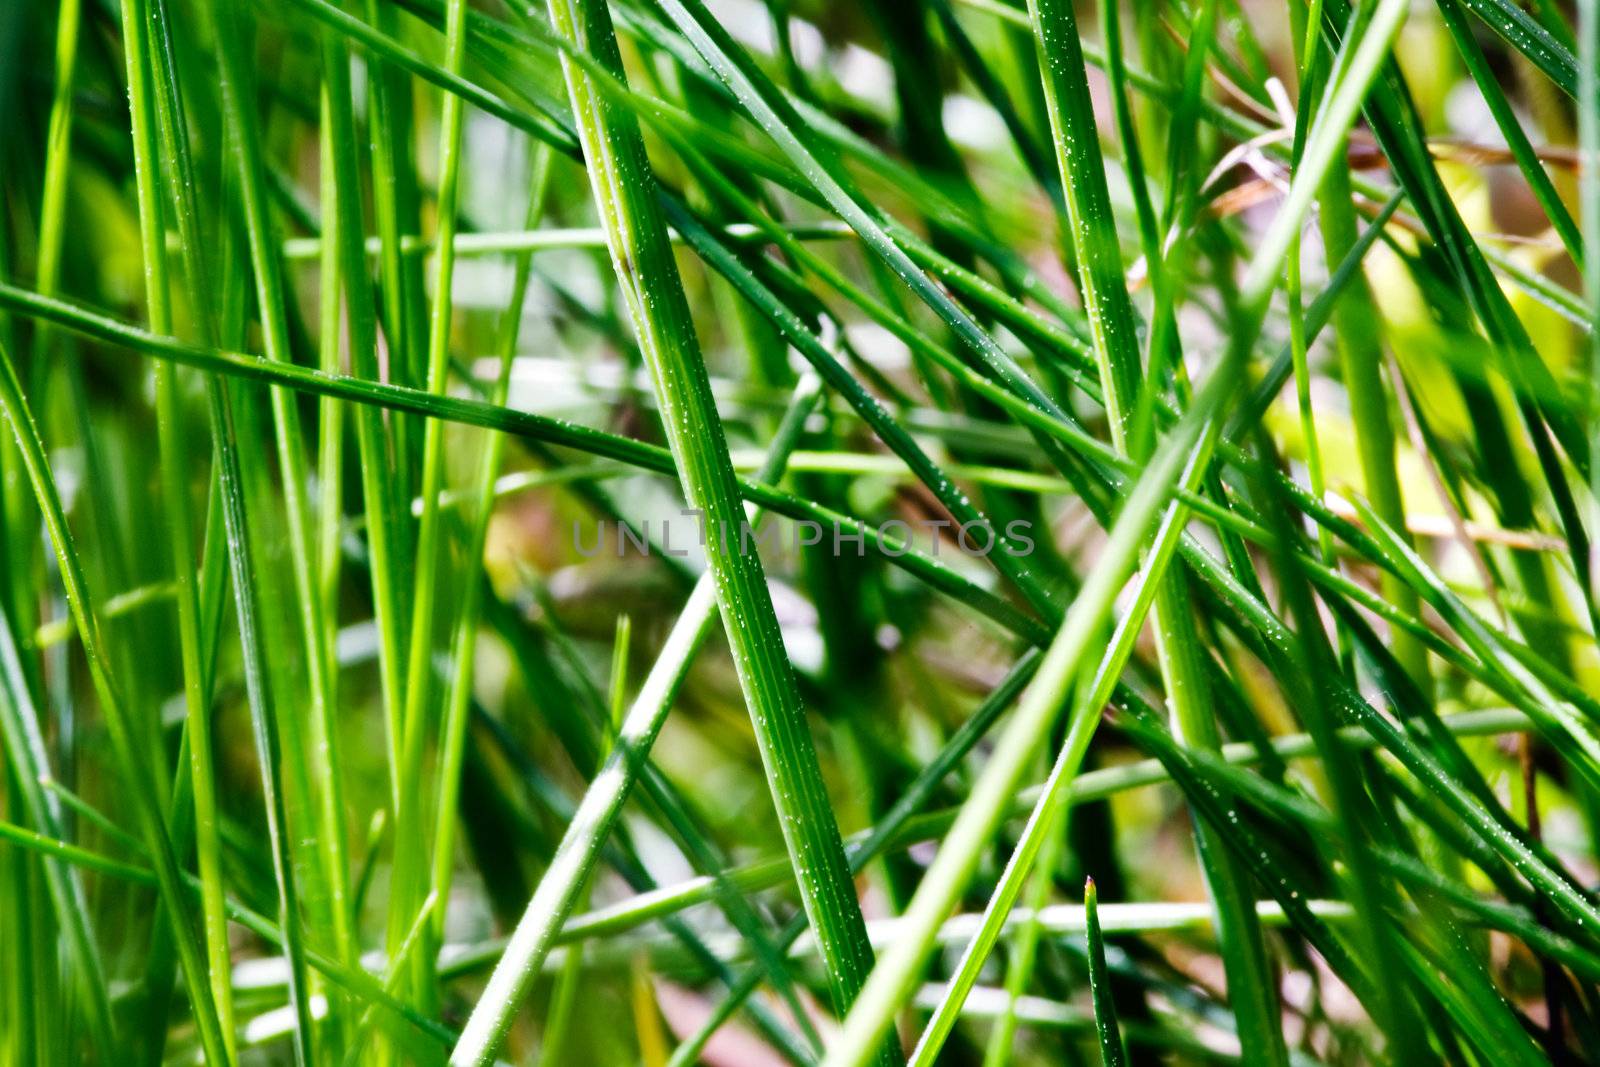 Grass texture background image - abstract.